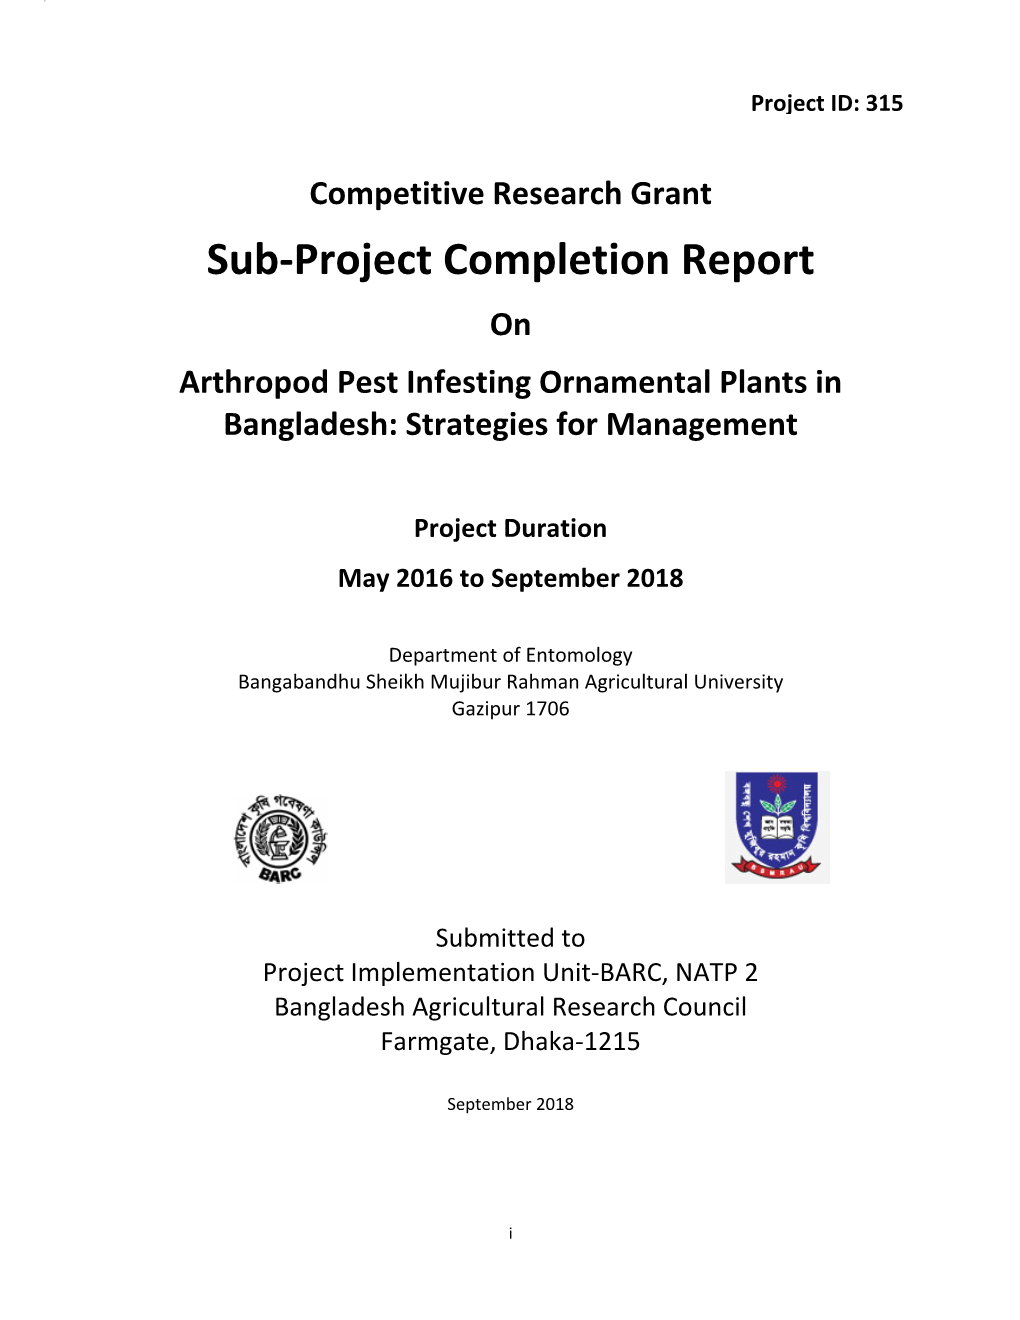 Competitive Research Grant Sub-Project Completion Report on Arthropod Pest Infesting Ornamental Plants in Bangladesh